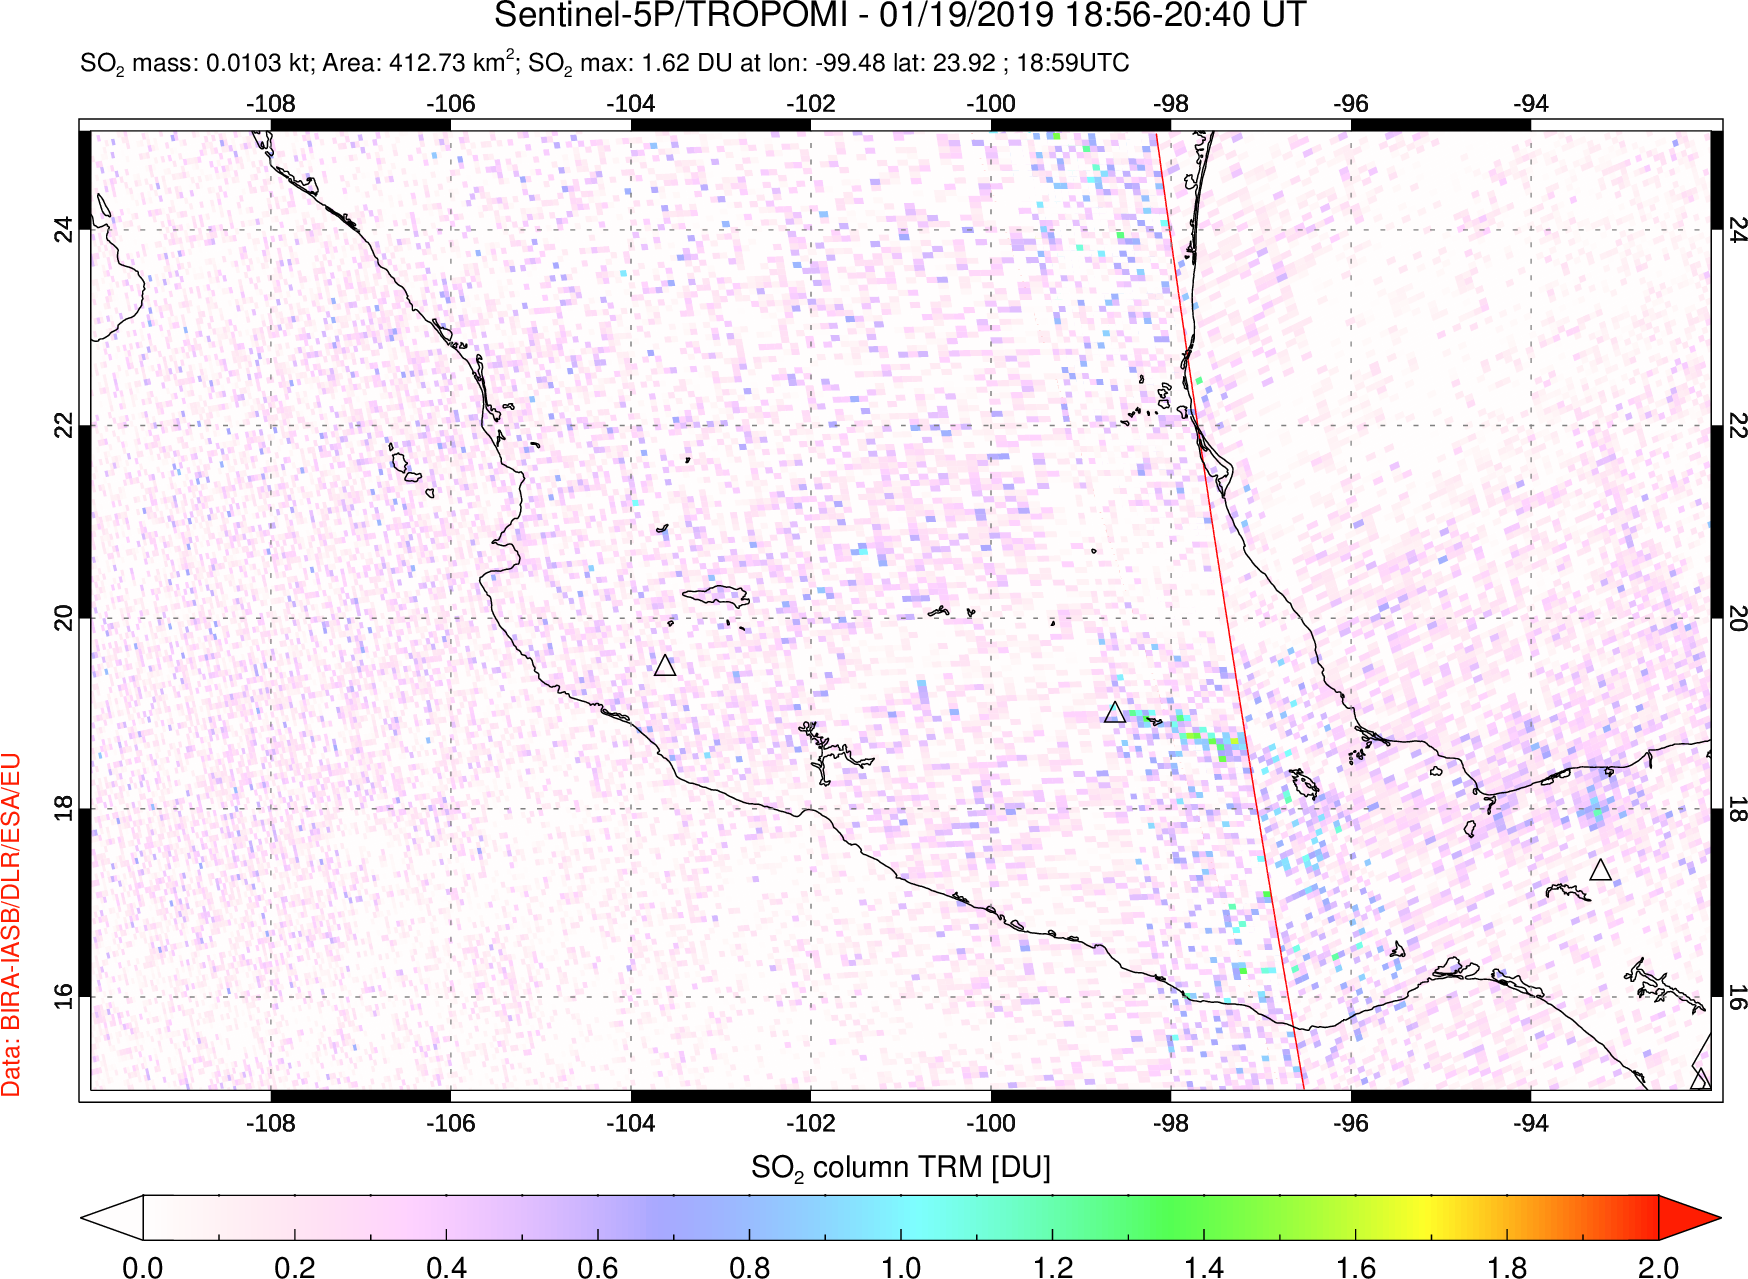 A sulfur dioxide image over Mexico on Jan 19, 2019.